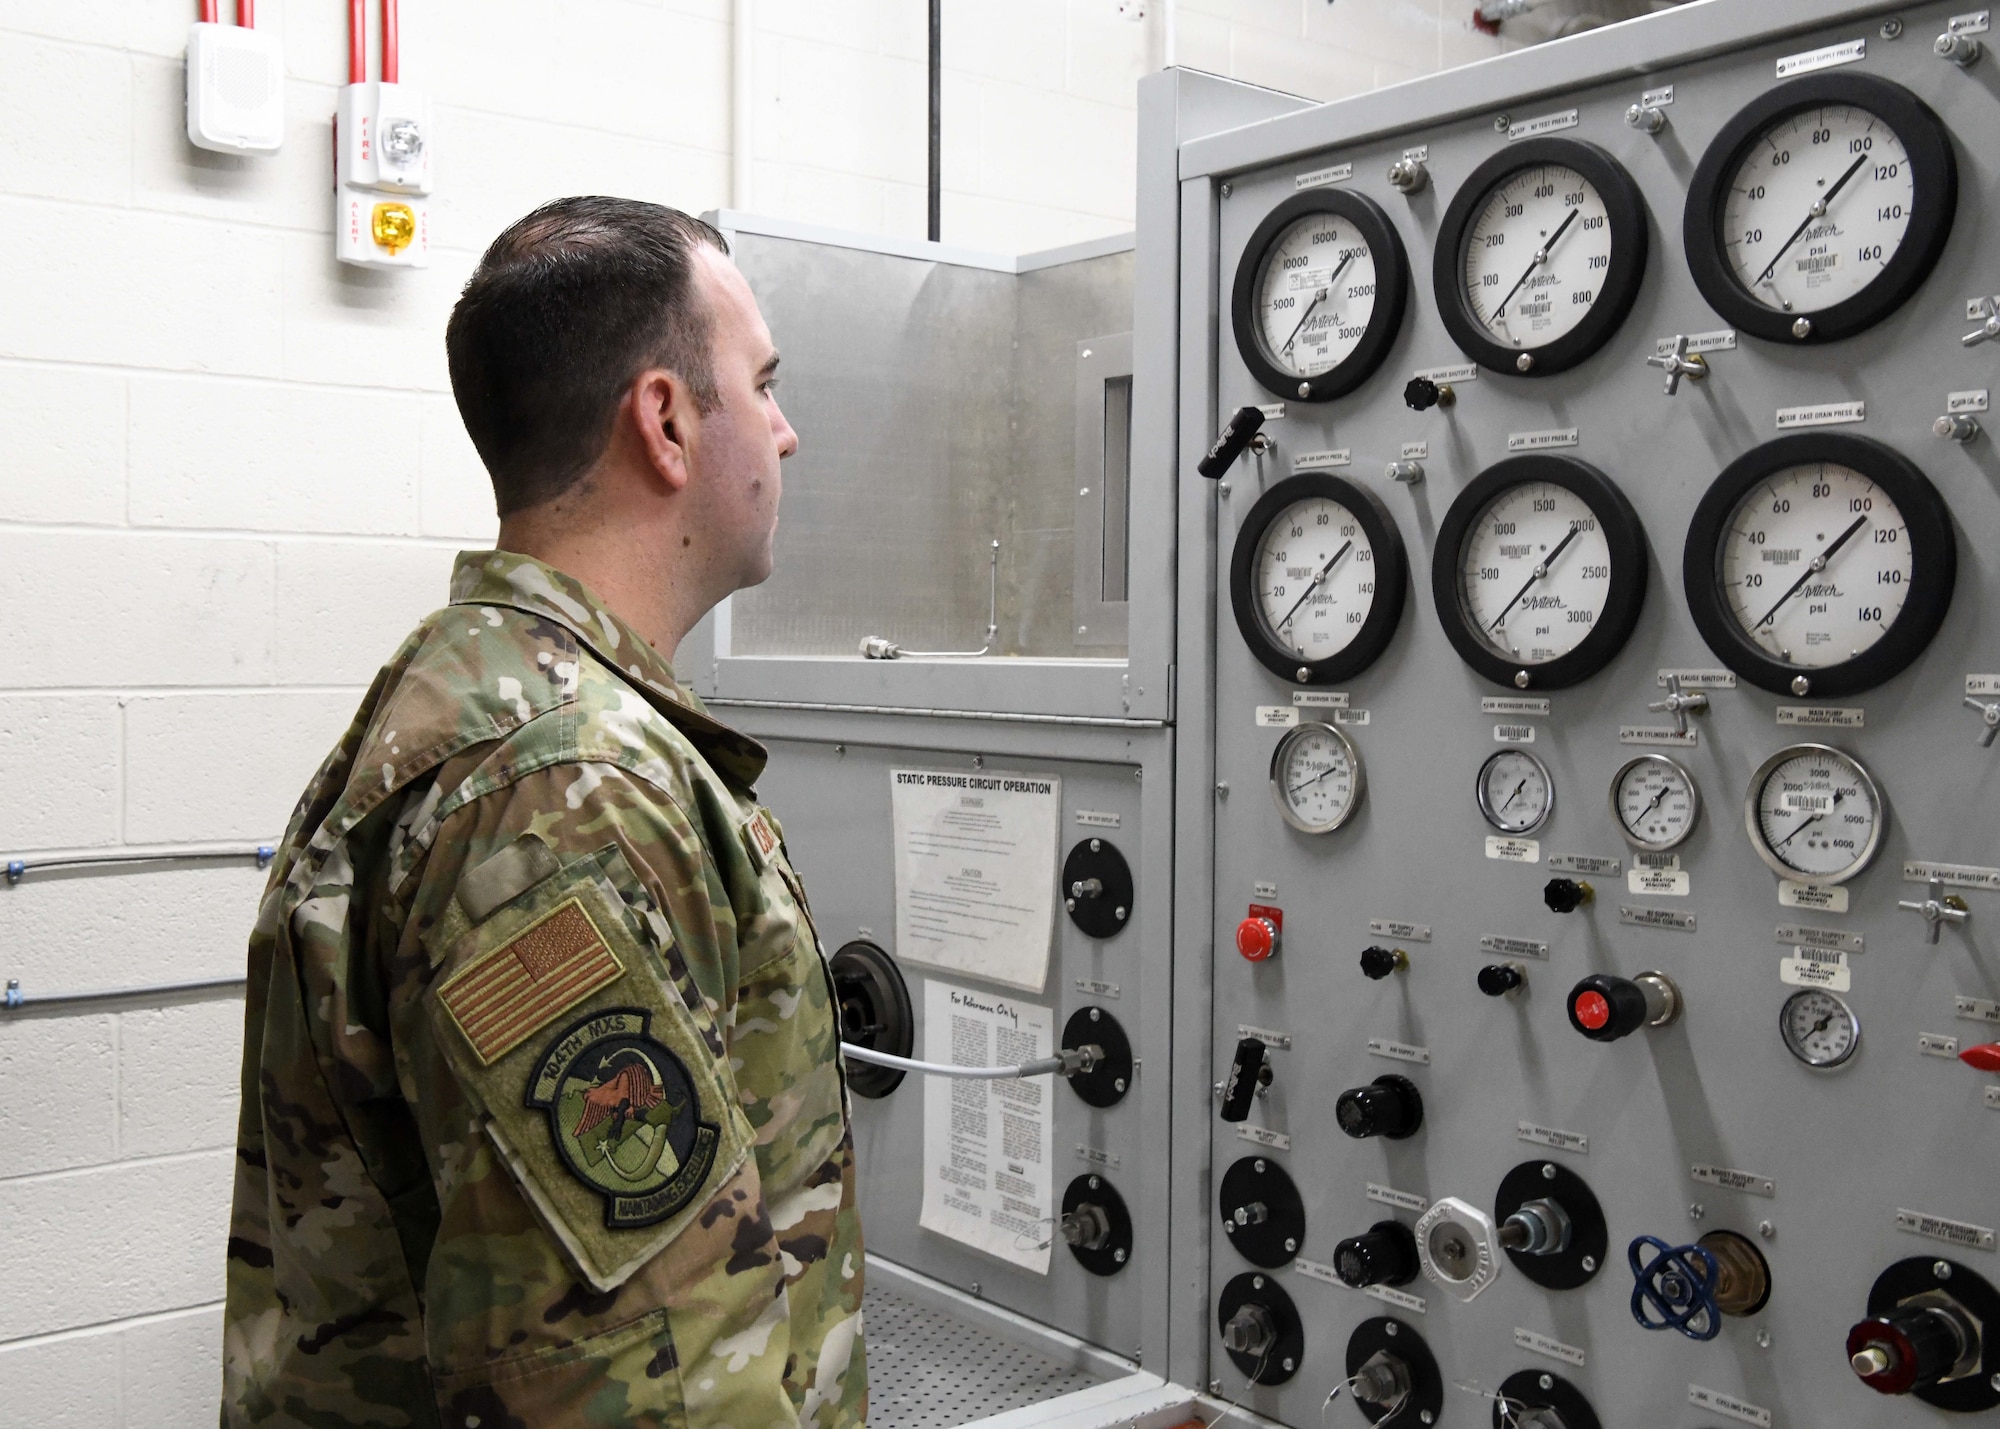 U.S. Air Force Tech. Sgt. Edward McGaughey, 104th Maintenance Squadron hydraulic systems supervisor, reads a back shop hydraulic test station. The hydraulic test station is useful for measuring the proper operation of hydraulic cylinders. (U.S. Air National Guard Photo by Airman 1st Class Camille Lienau)